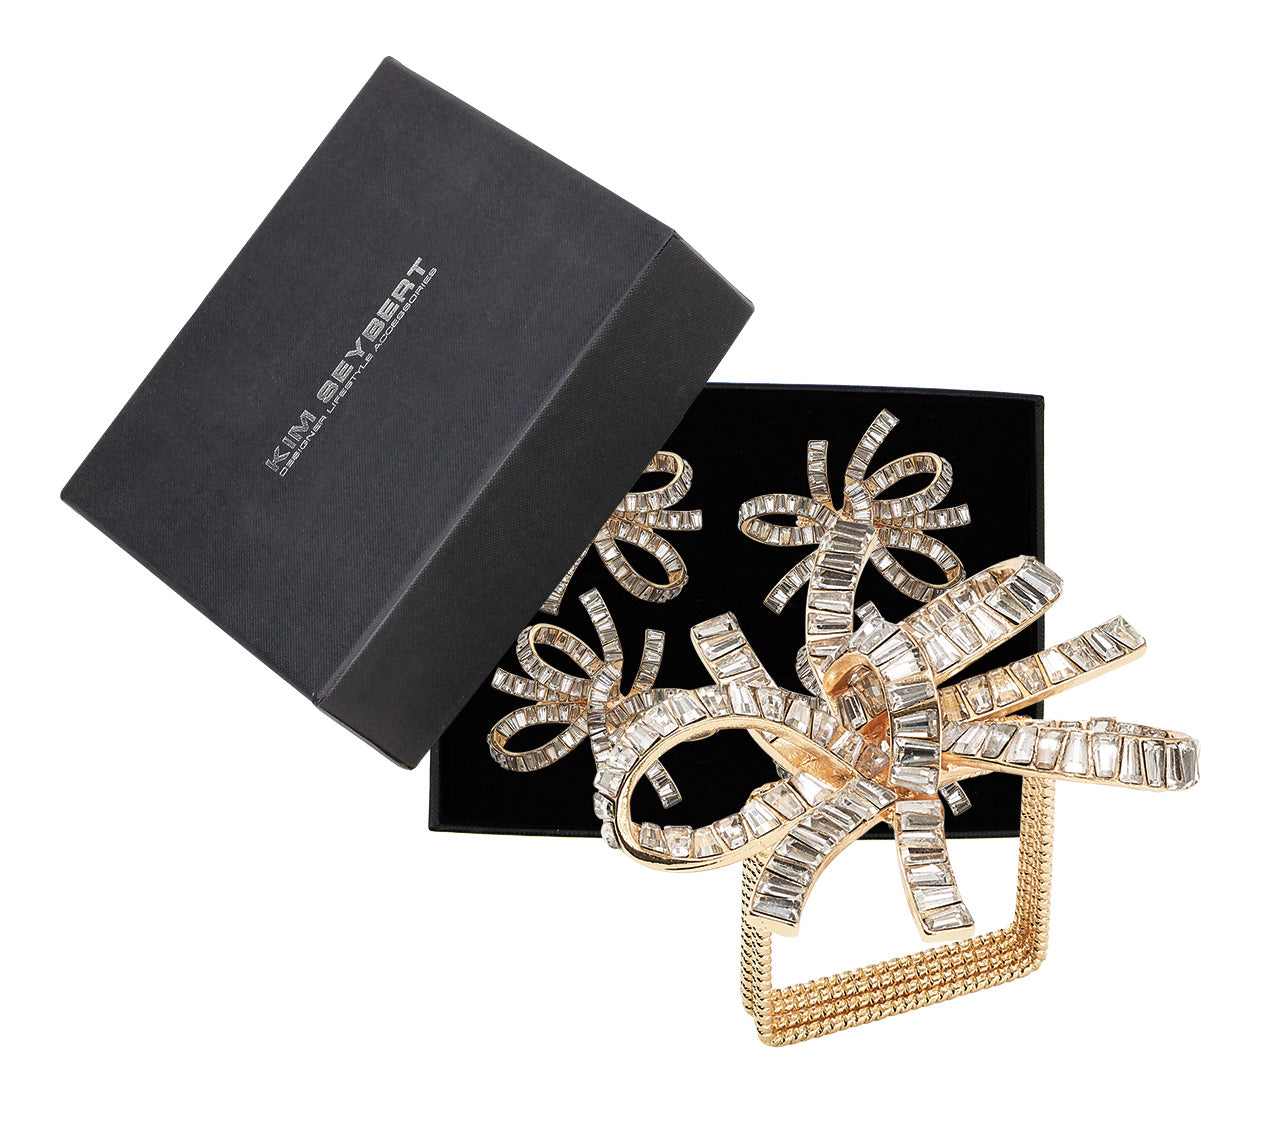 Jeweled Bow Napkin Ring in Gold & Crystal, Set of 4 in a Gift Box